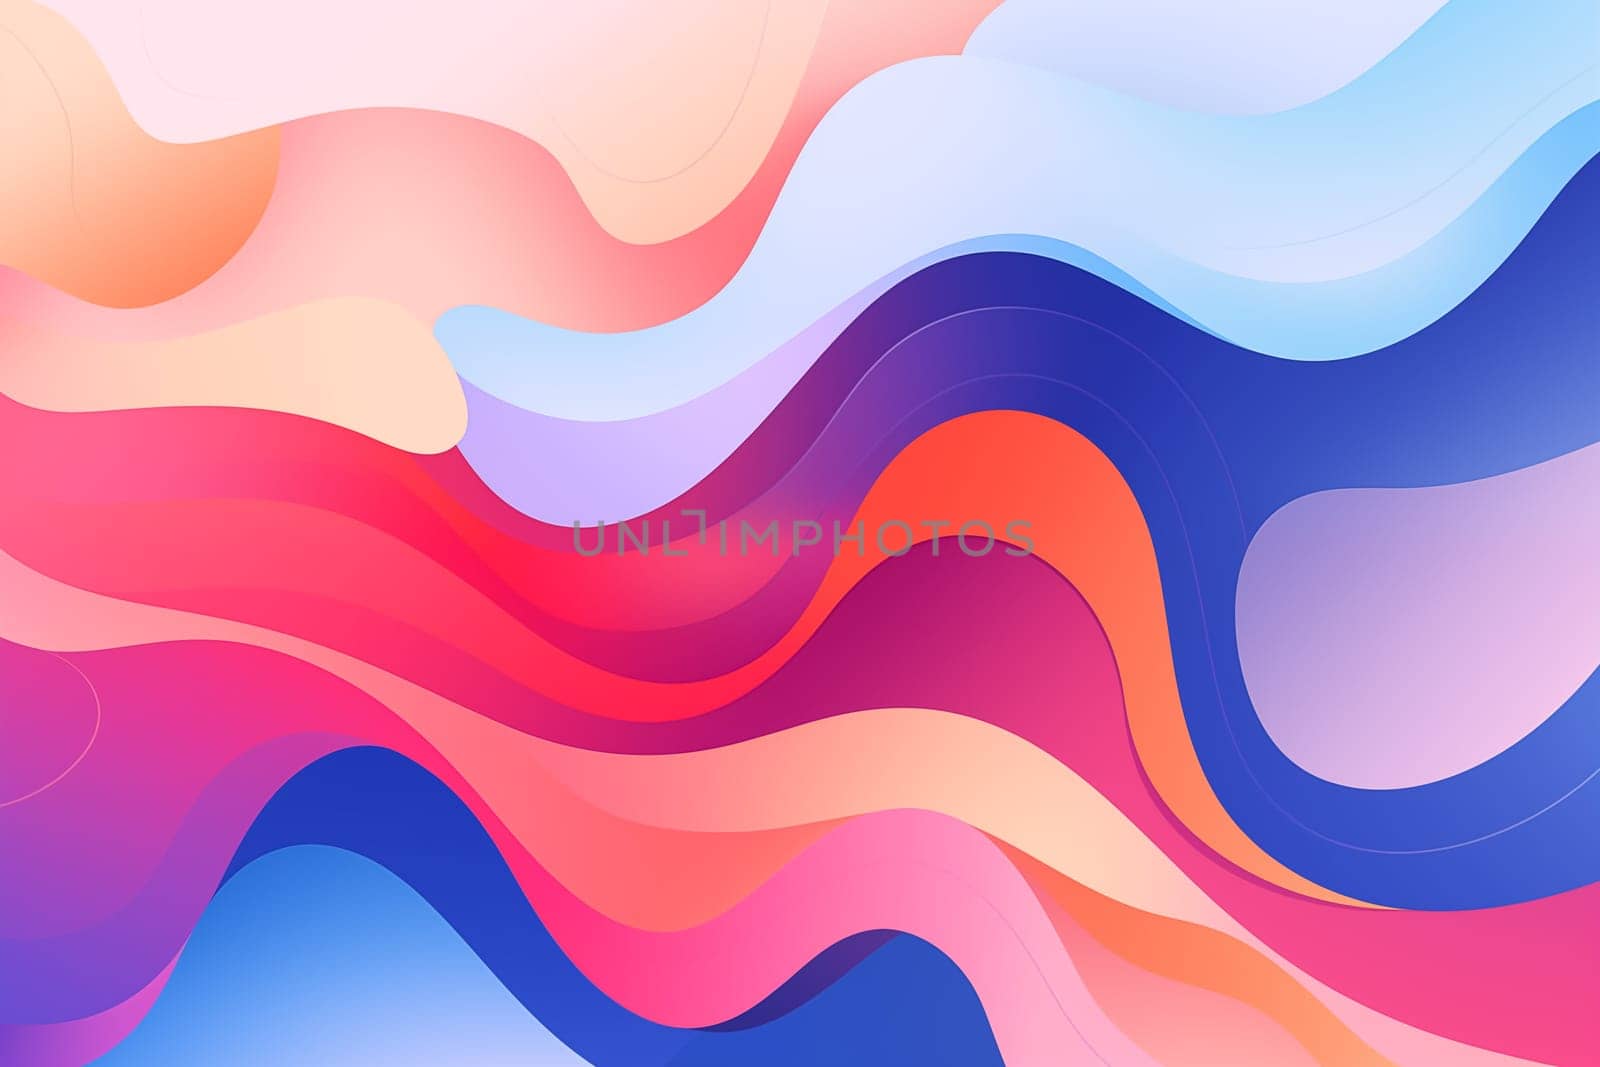 Abstract geometric trend liquid gradient shape on fluid shape illustration composition background by Nadtochiy